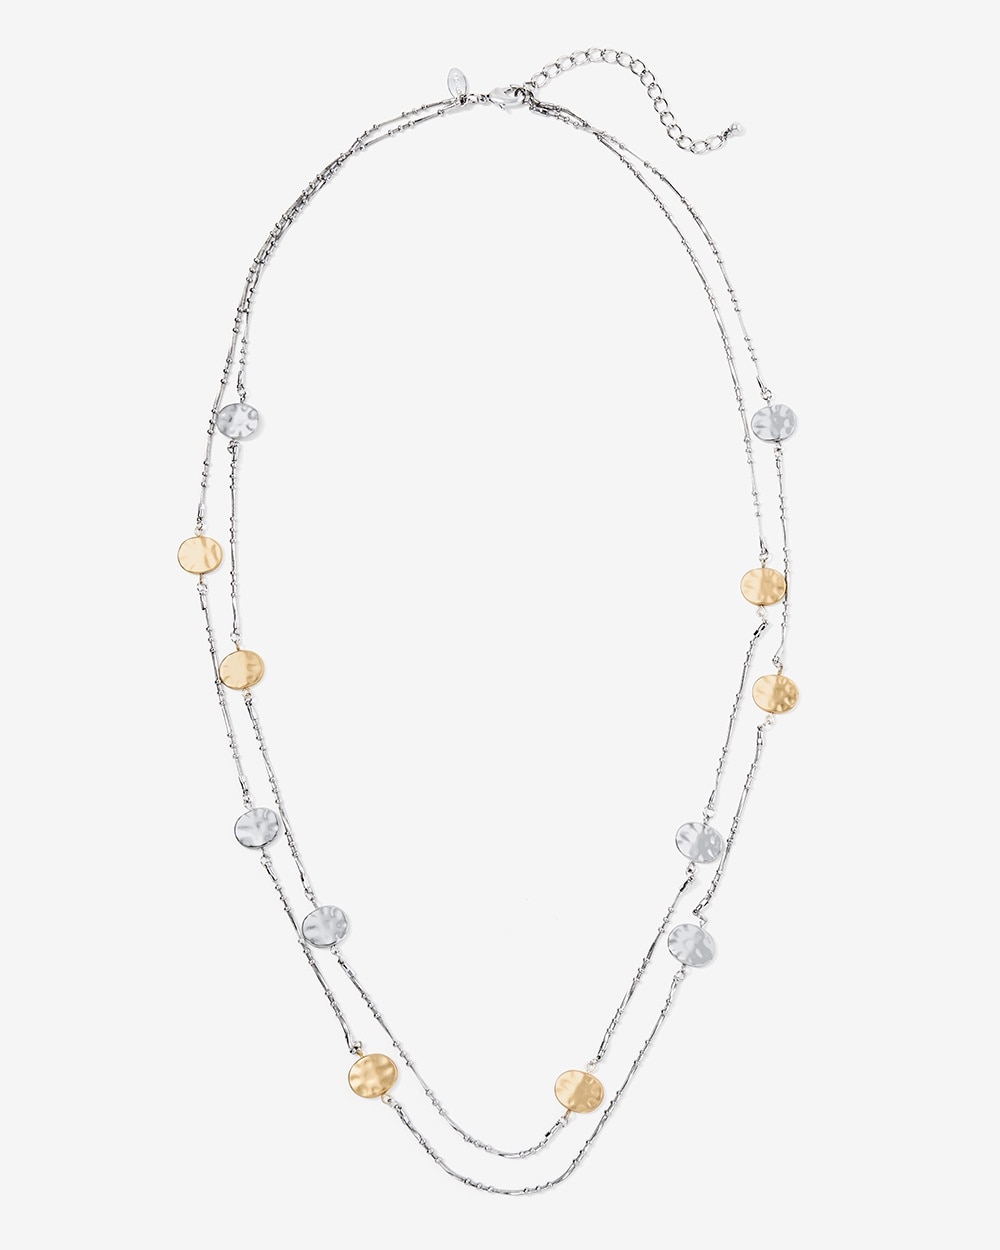 Sloane Hammered Beads Necklace